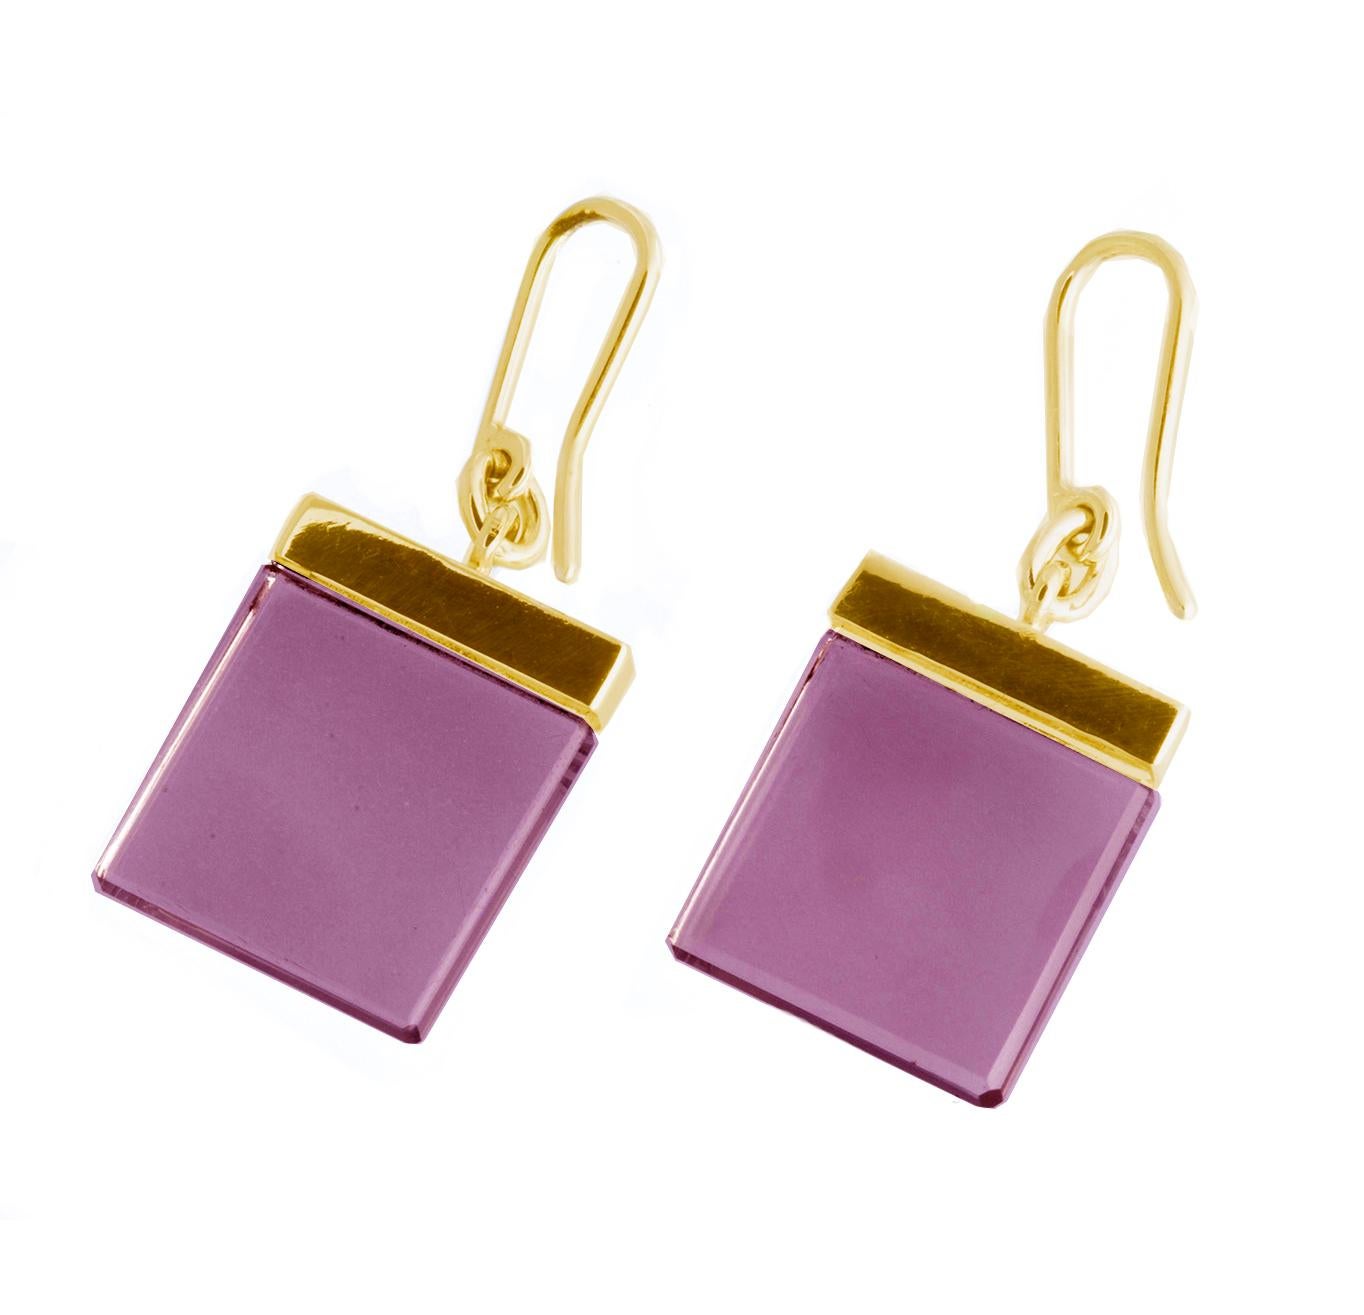 The earrings are made of 14 karat yellow gold and feature 15x15x3 mm natural amethysts that are both attractive and elegant. The gems may look more light pink than purple in this cut.

This contemporary jewellery collection was originally designed